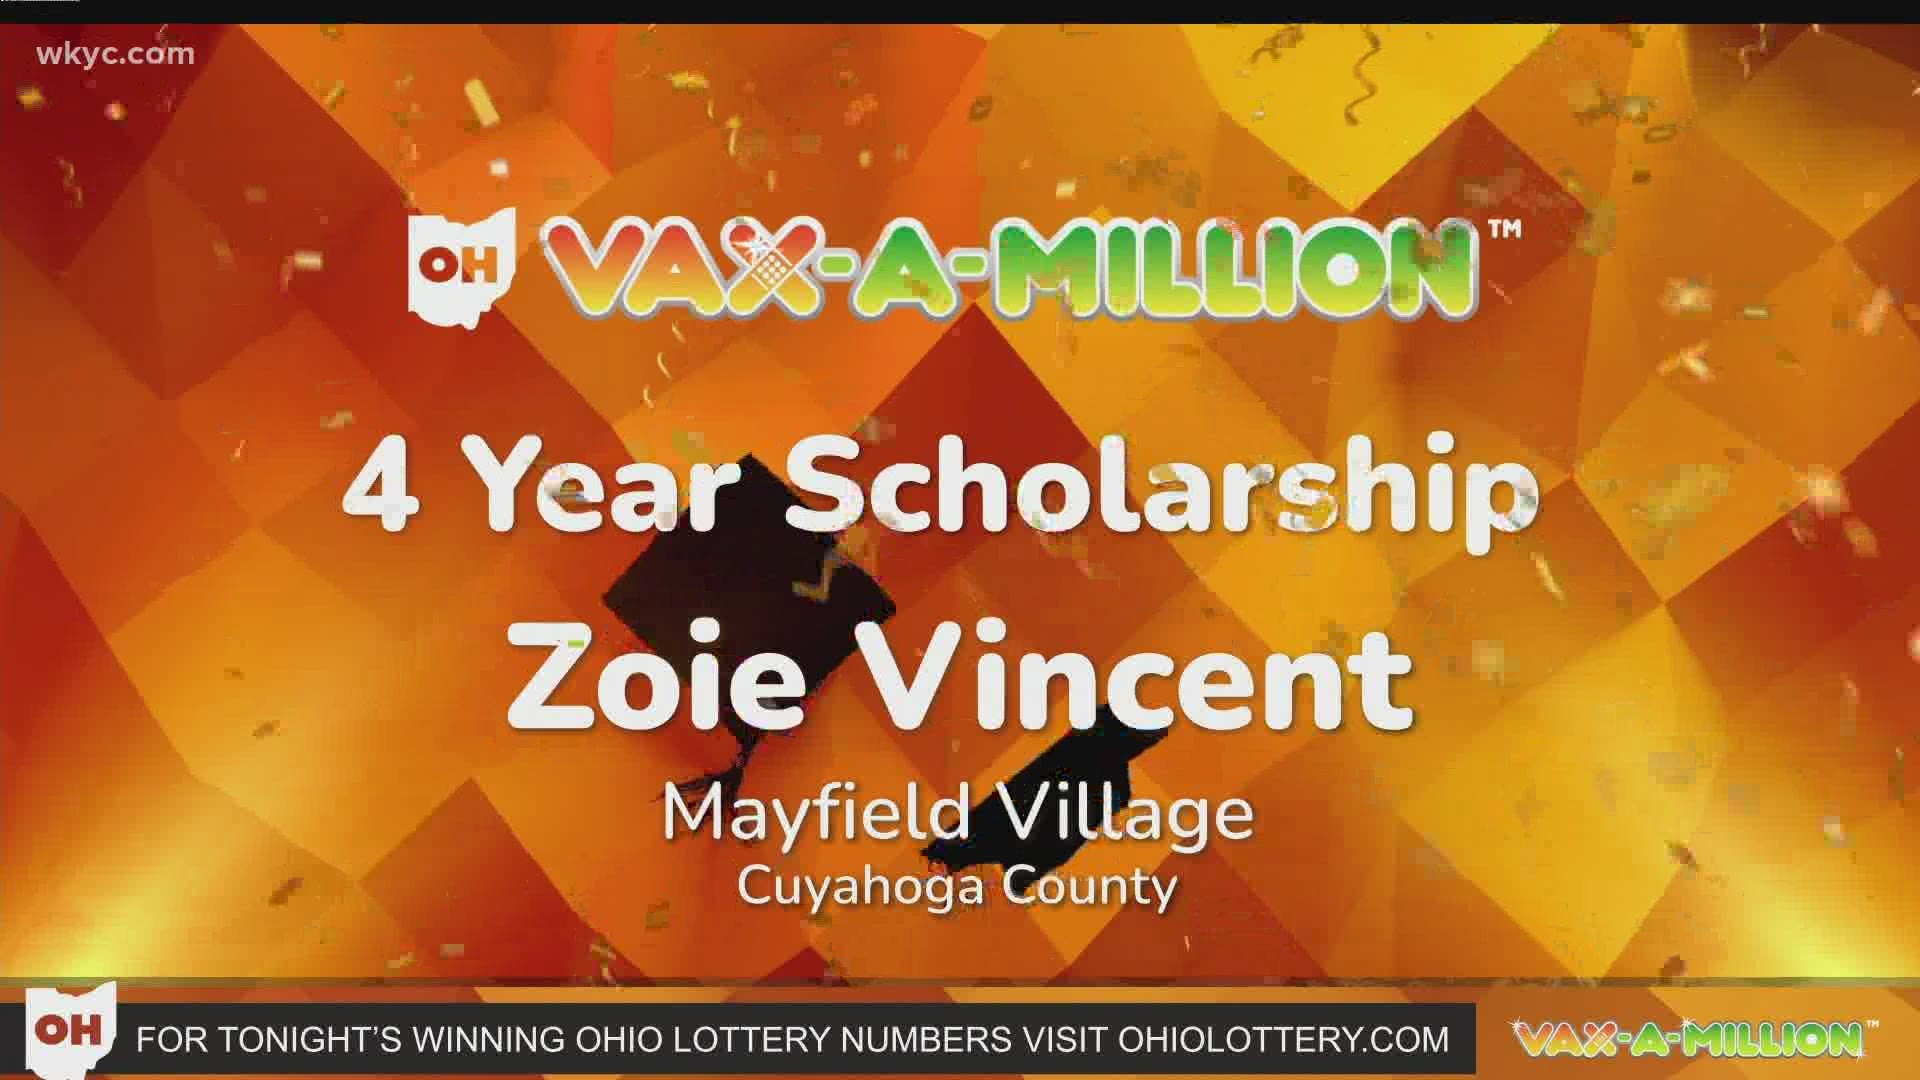 Toledo's Jonathan Carlyle was the winner of the second $1 million prize, while Zoie Vincent of Mayfield Village earned a full-ride college scholarship.